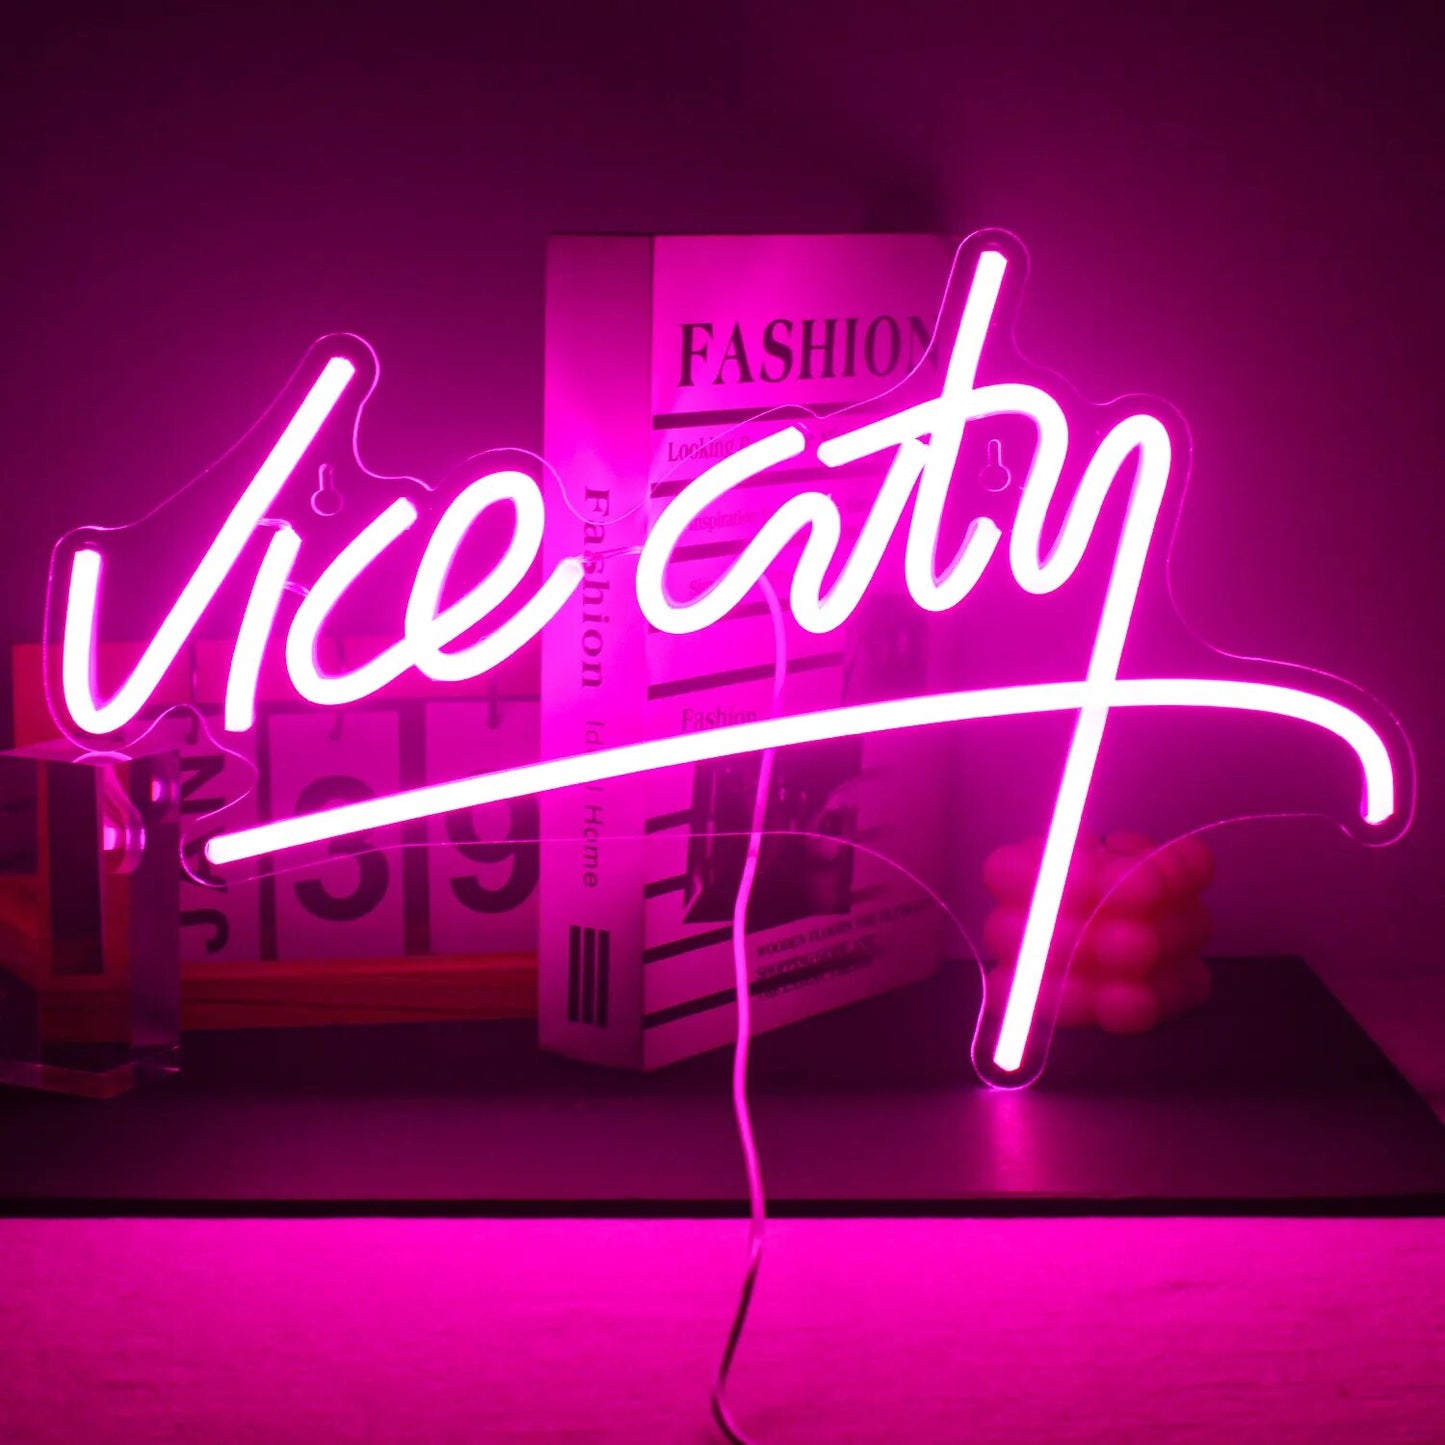 Wanxing Vice City Neon Sign Pink Led Lights Bedroom Letters Game Room Bar Party Indoor Home Arcade Shop Cave Art Wall Decoration